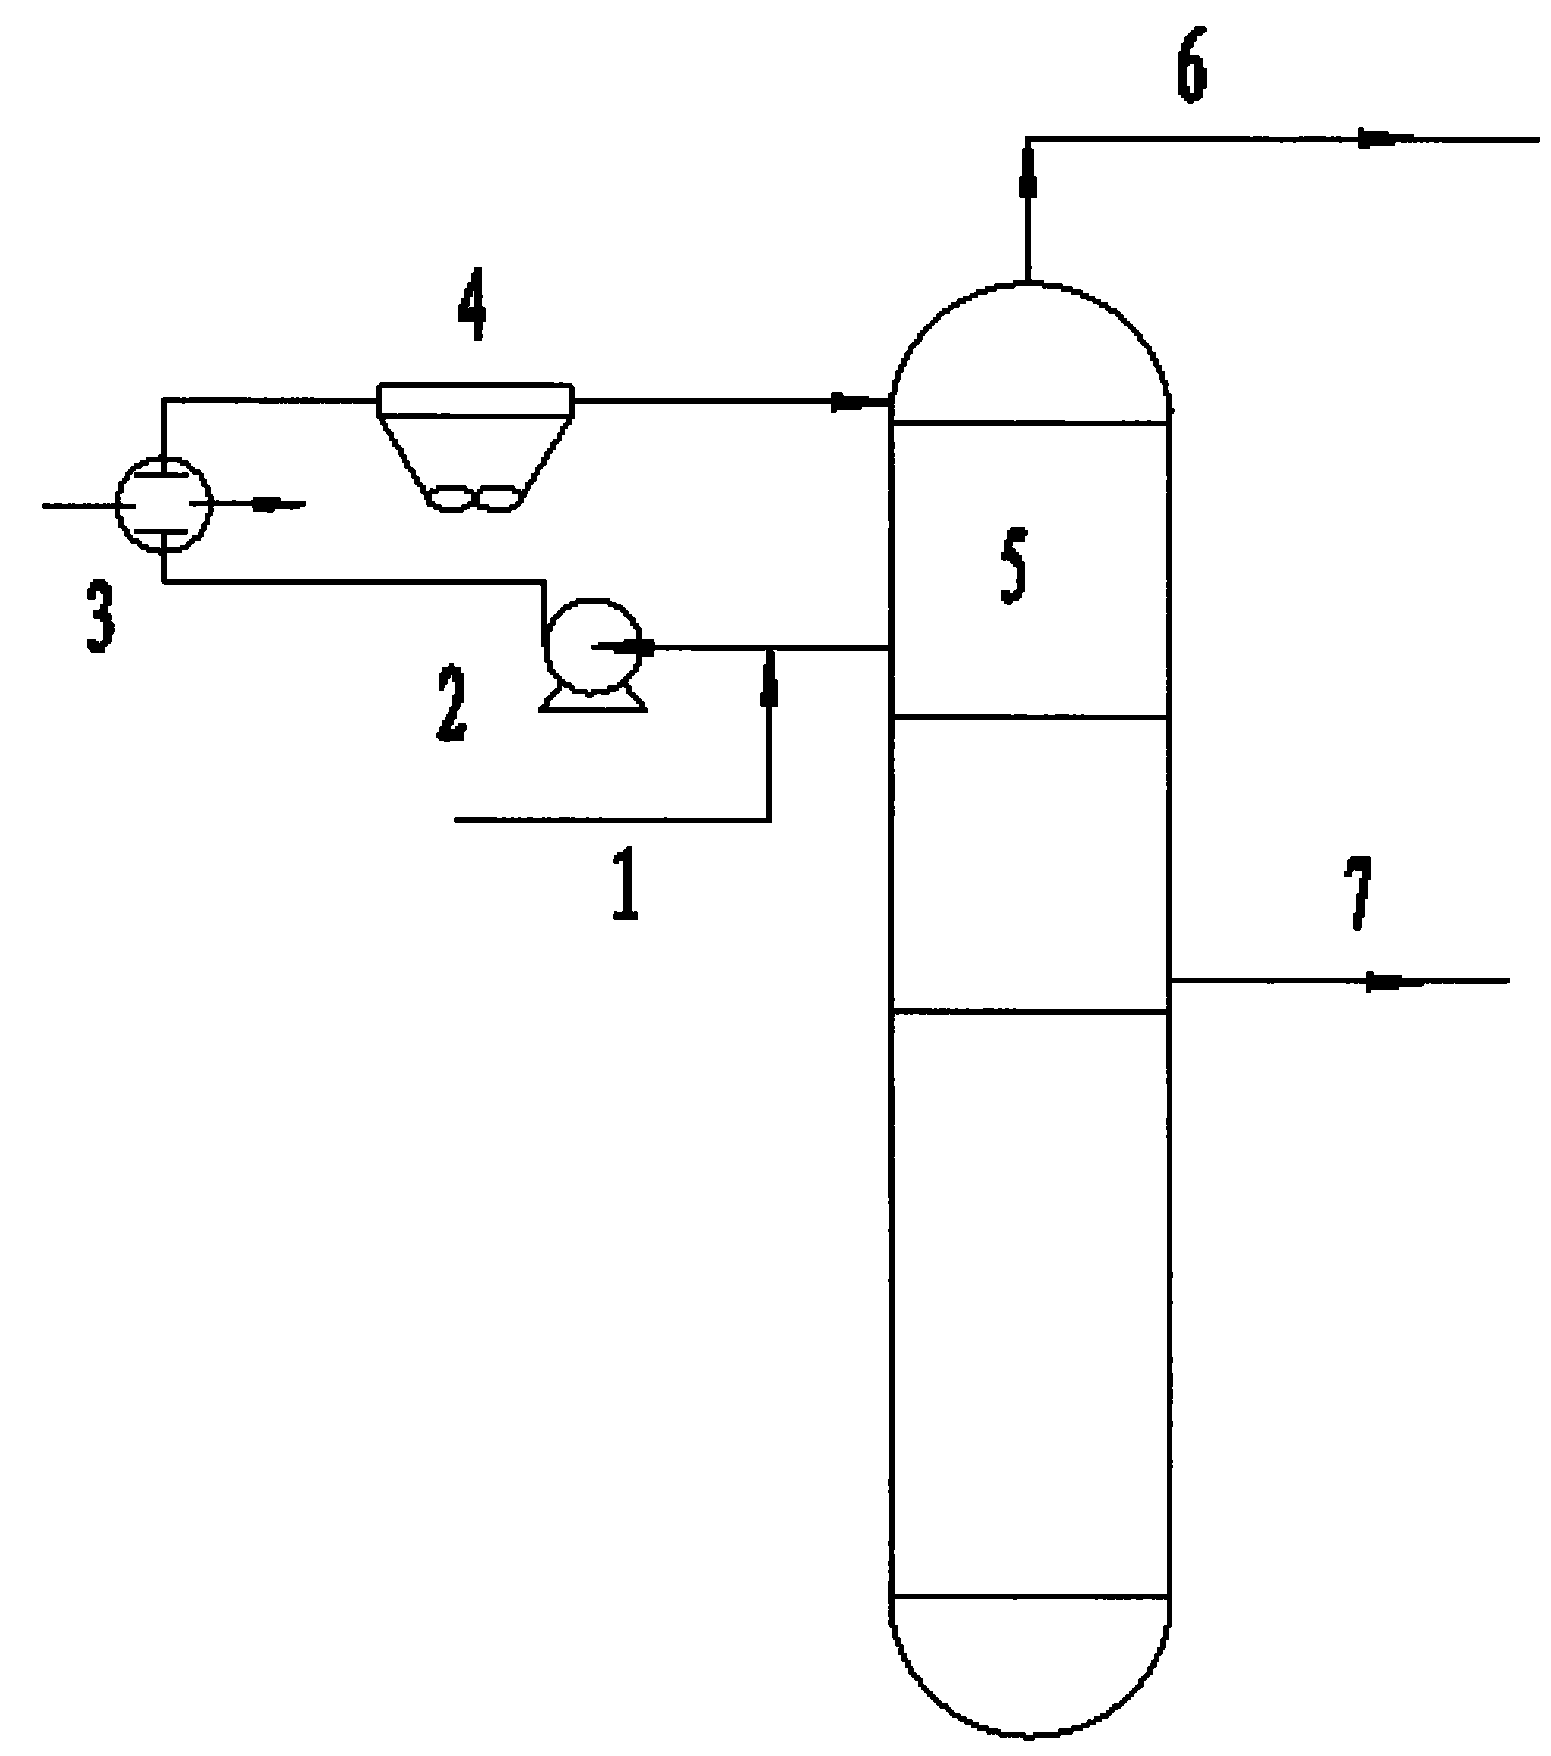 Process for treating salt deposition in fractionating tower